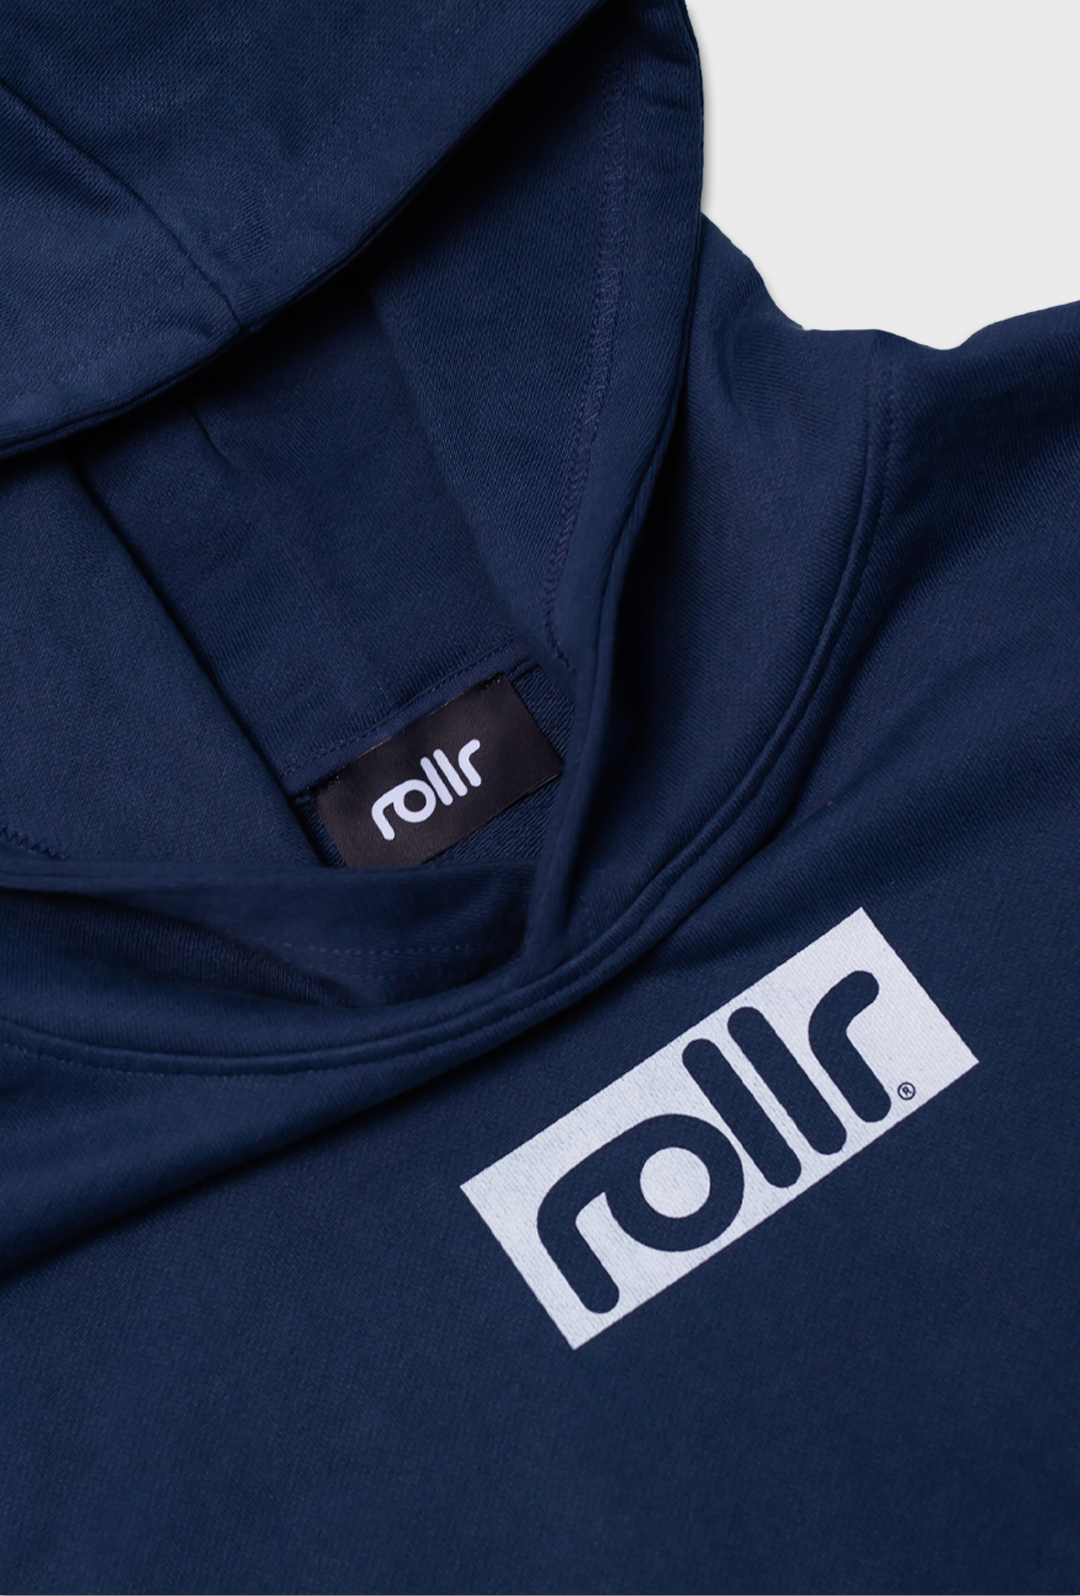 roller oversized dusk blue hoodie made organic cotton with rollr print logo and large hood